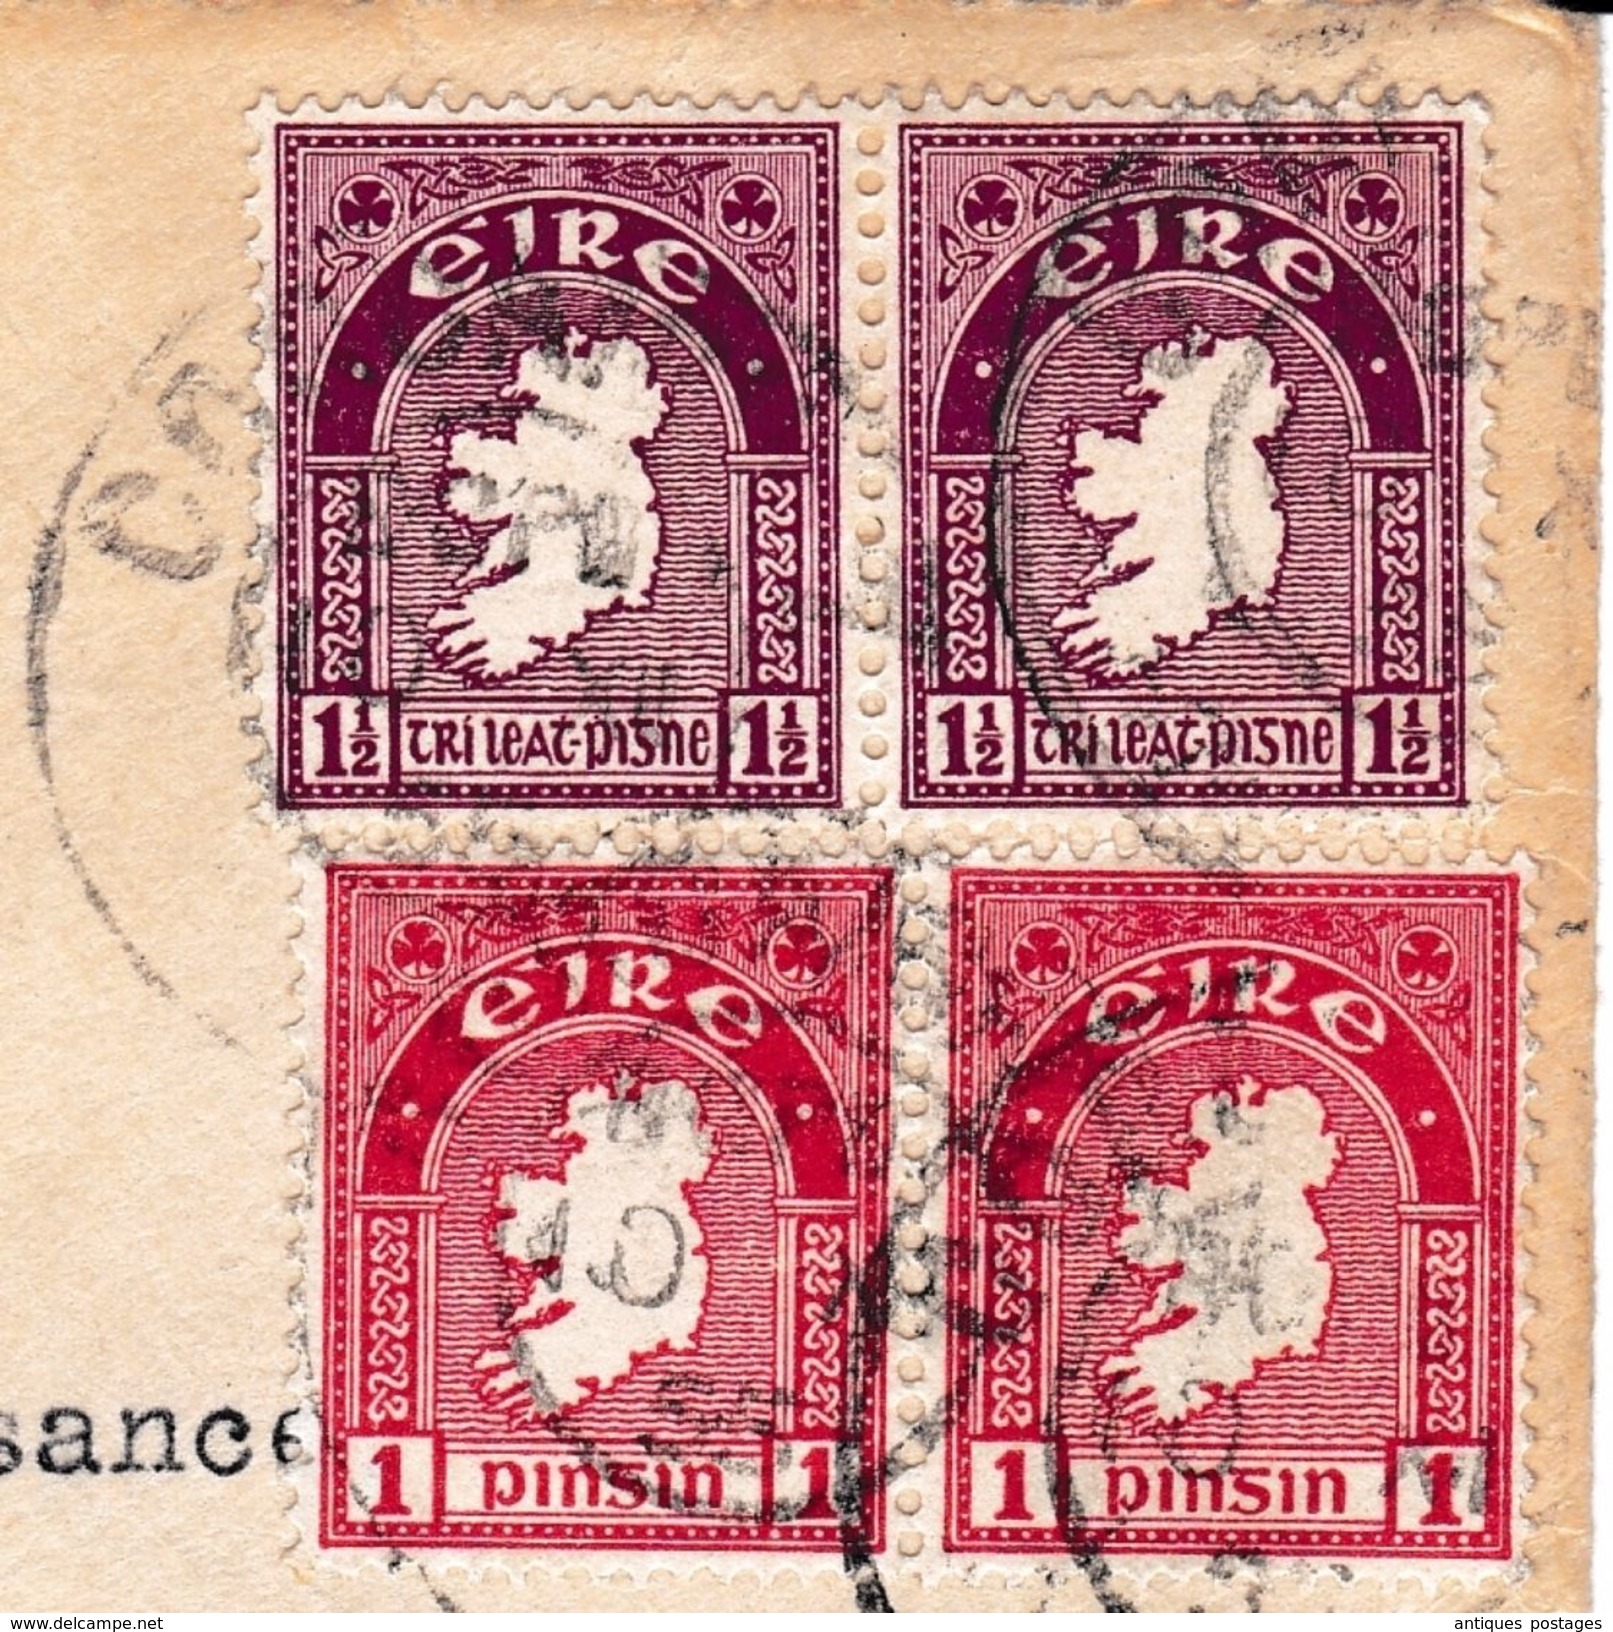 Cover Irland Irlande Cork Brown & Nolan Ltd Publishers & Stationers - Lettres & Documents